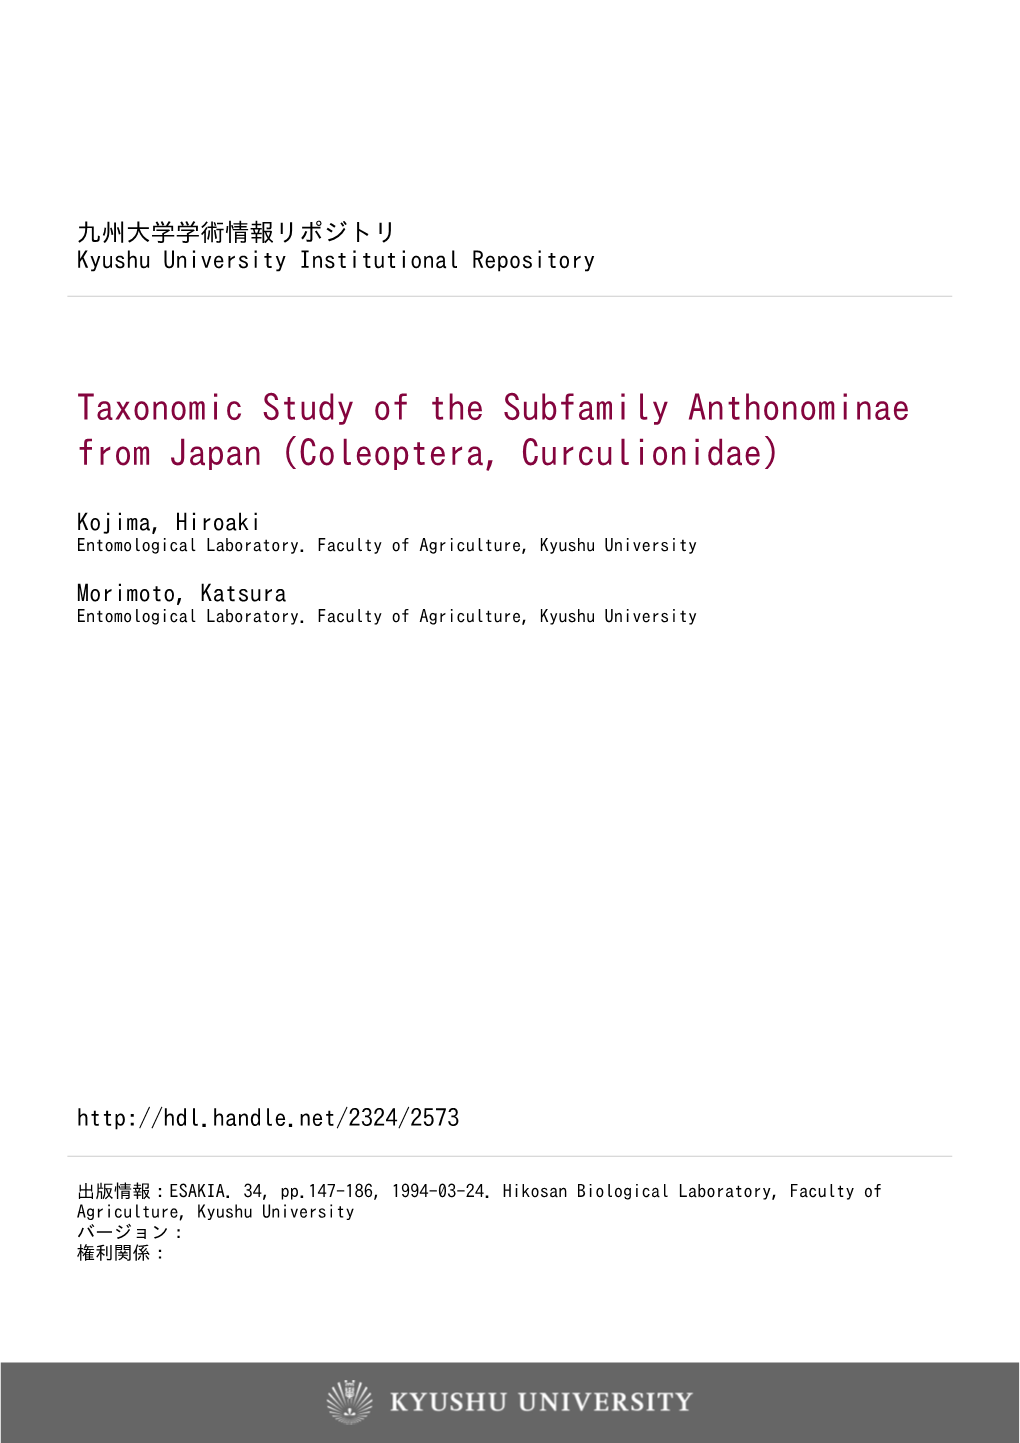 Taxonomic Study of the Subfamily Anthonominae from Japan (Coleoptera, Curculionidae)